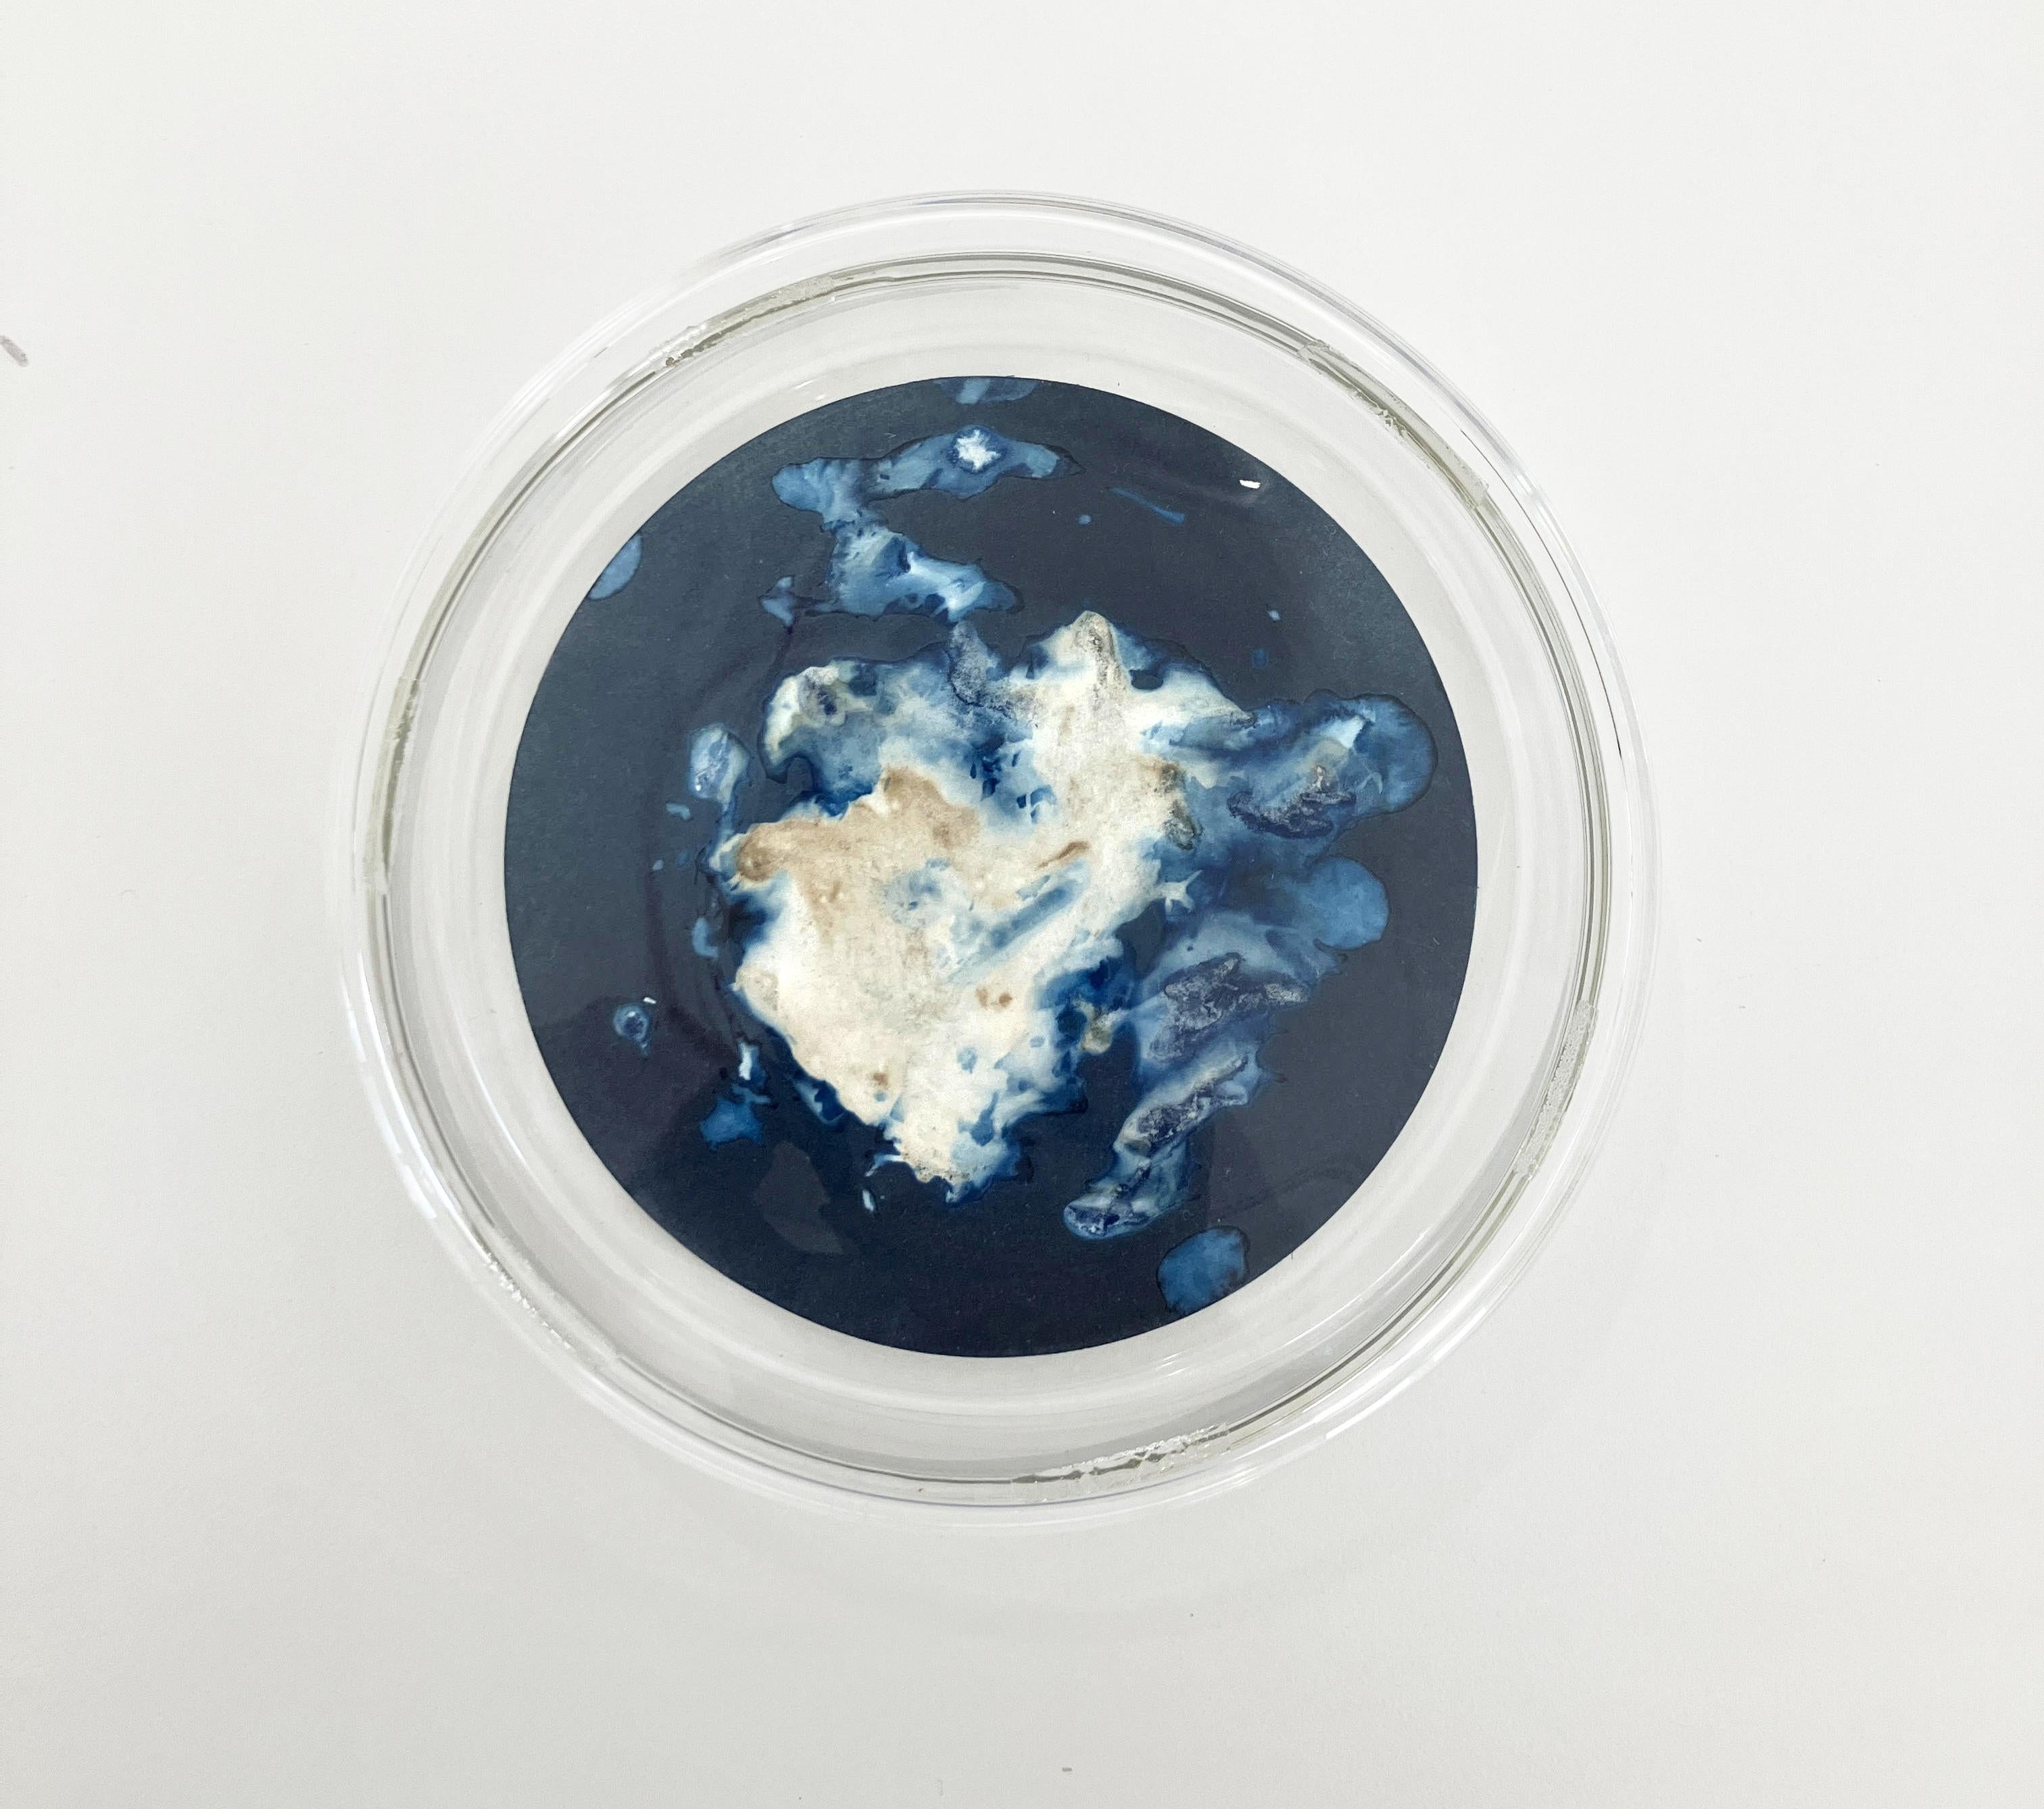 Algas 88, 28, 87. Cyanotype photograhs mounted in high resistance glass dish For Sale 4